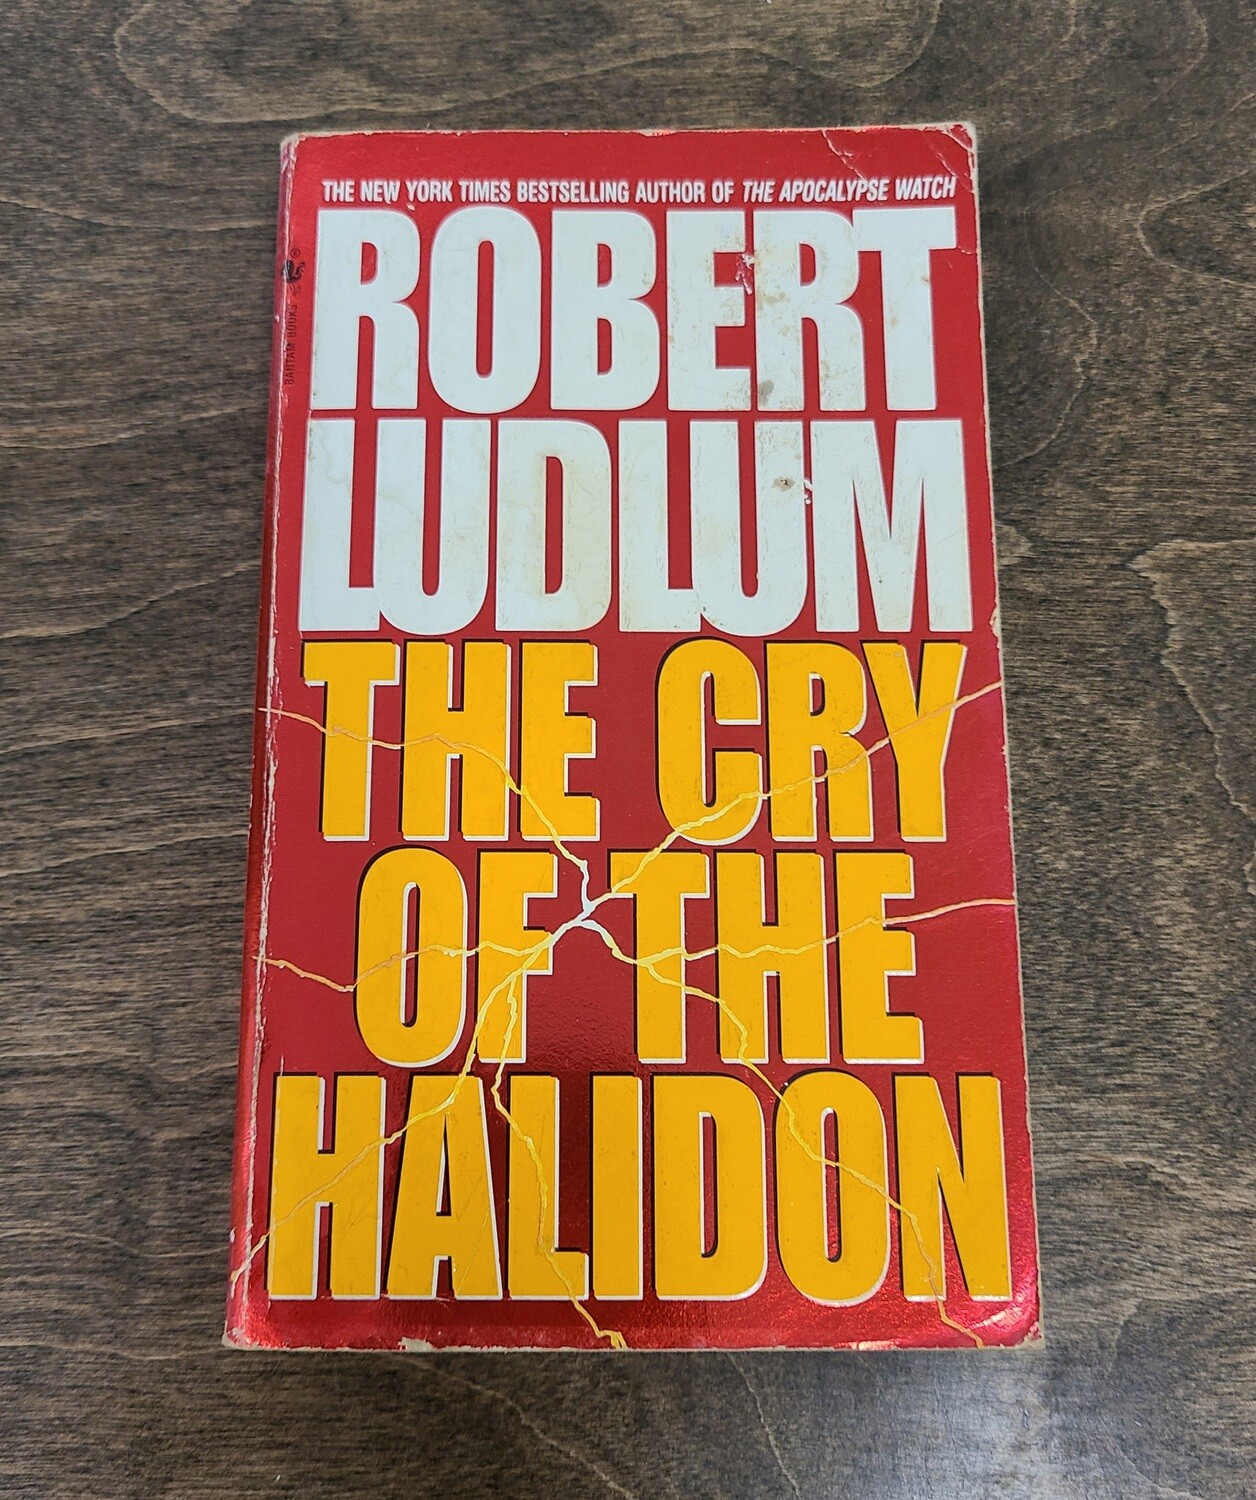 The Cry of the Halidon by Robert Ludlum